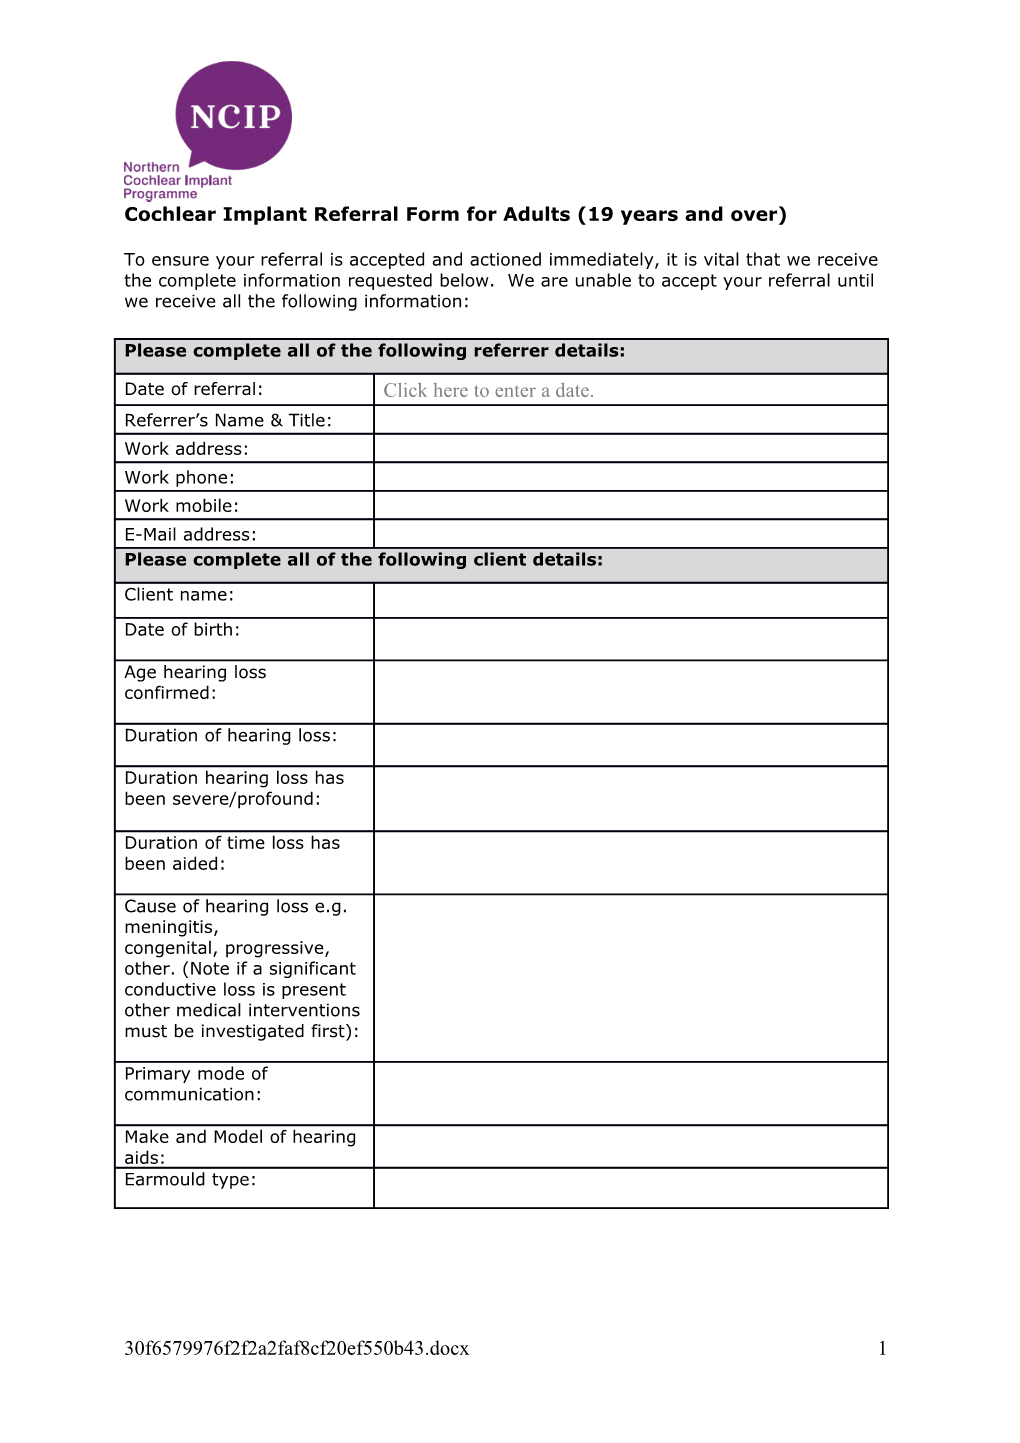 Cochlear Implant Referral Form for Adults (19 Years and Over)